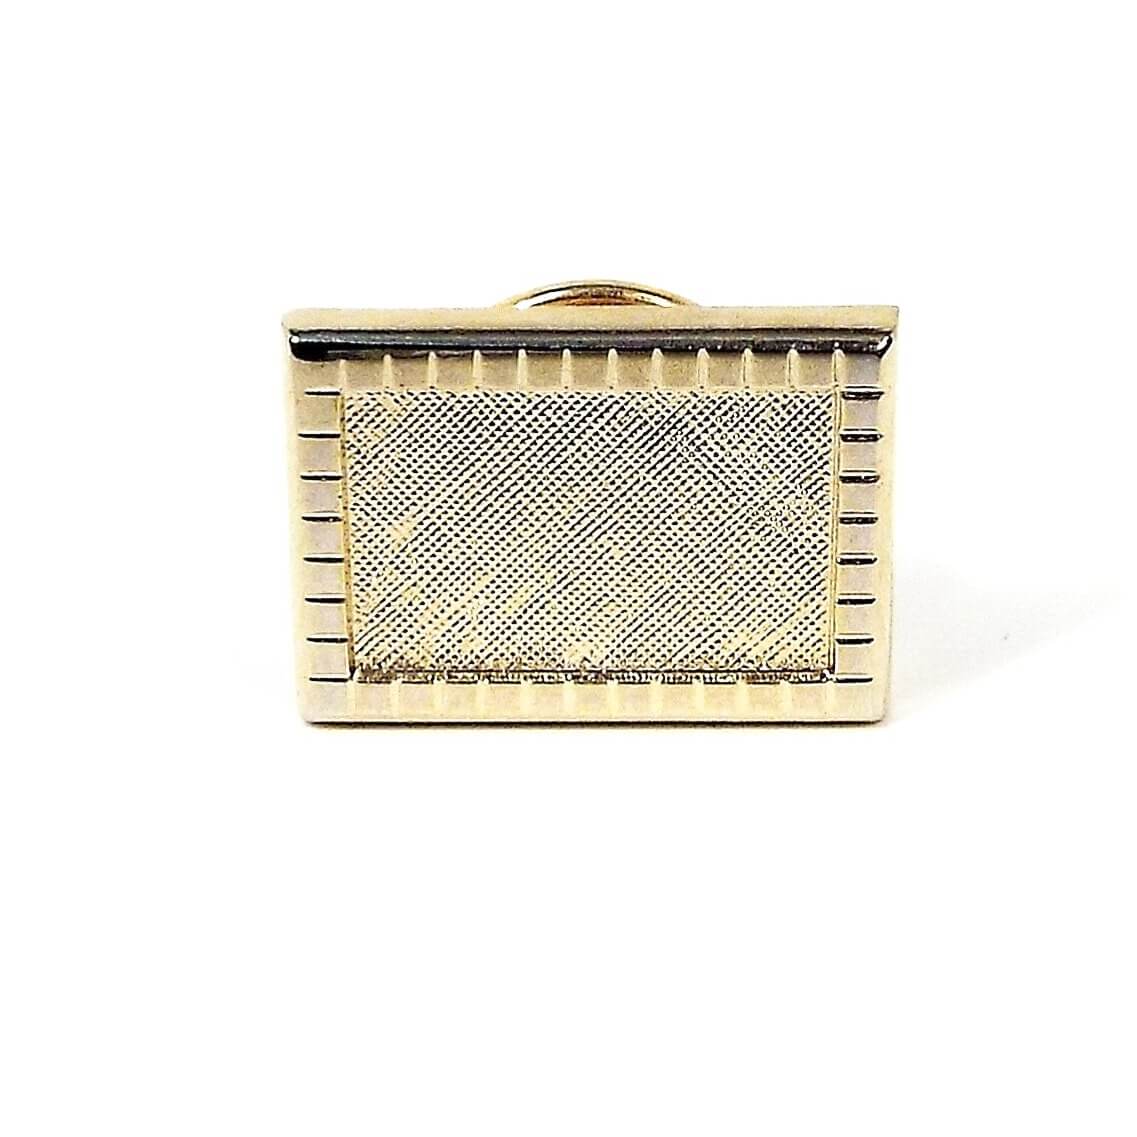 Front view of the retro vintage tie tack. The metal is gold tone plated in color. It is rectangle shaped with a square pattern around the outer edge. The inside front has a matte textured design.